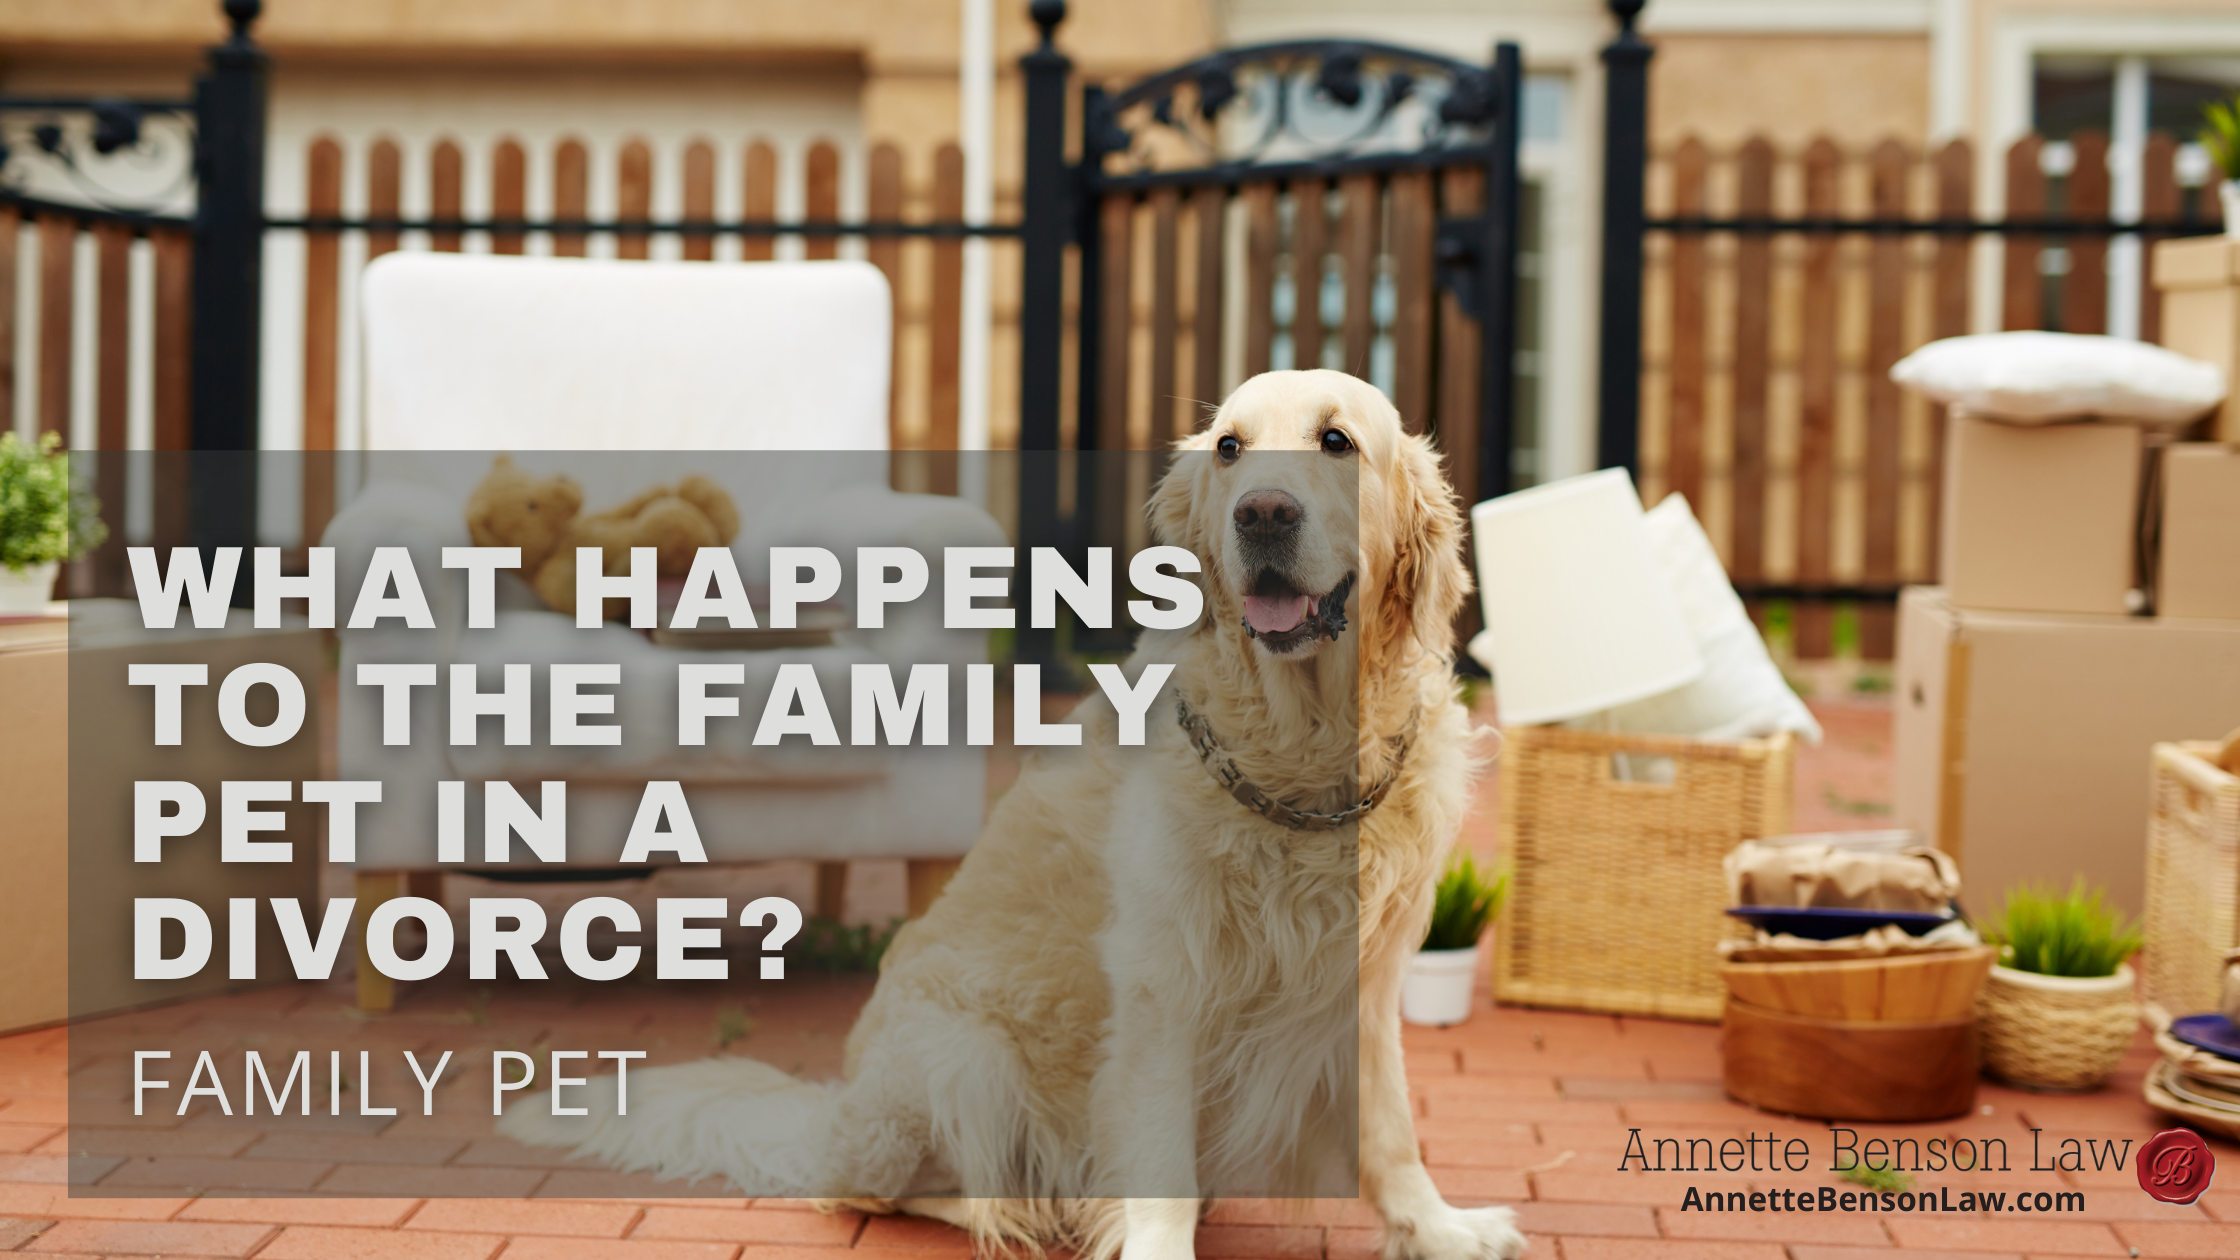 What happens to the family pet in a divorce